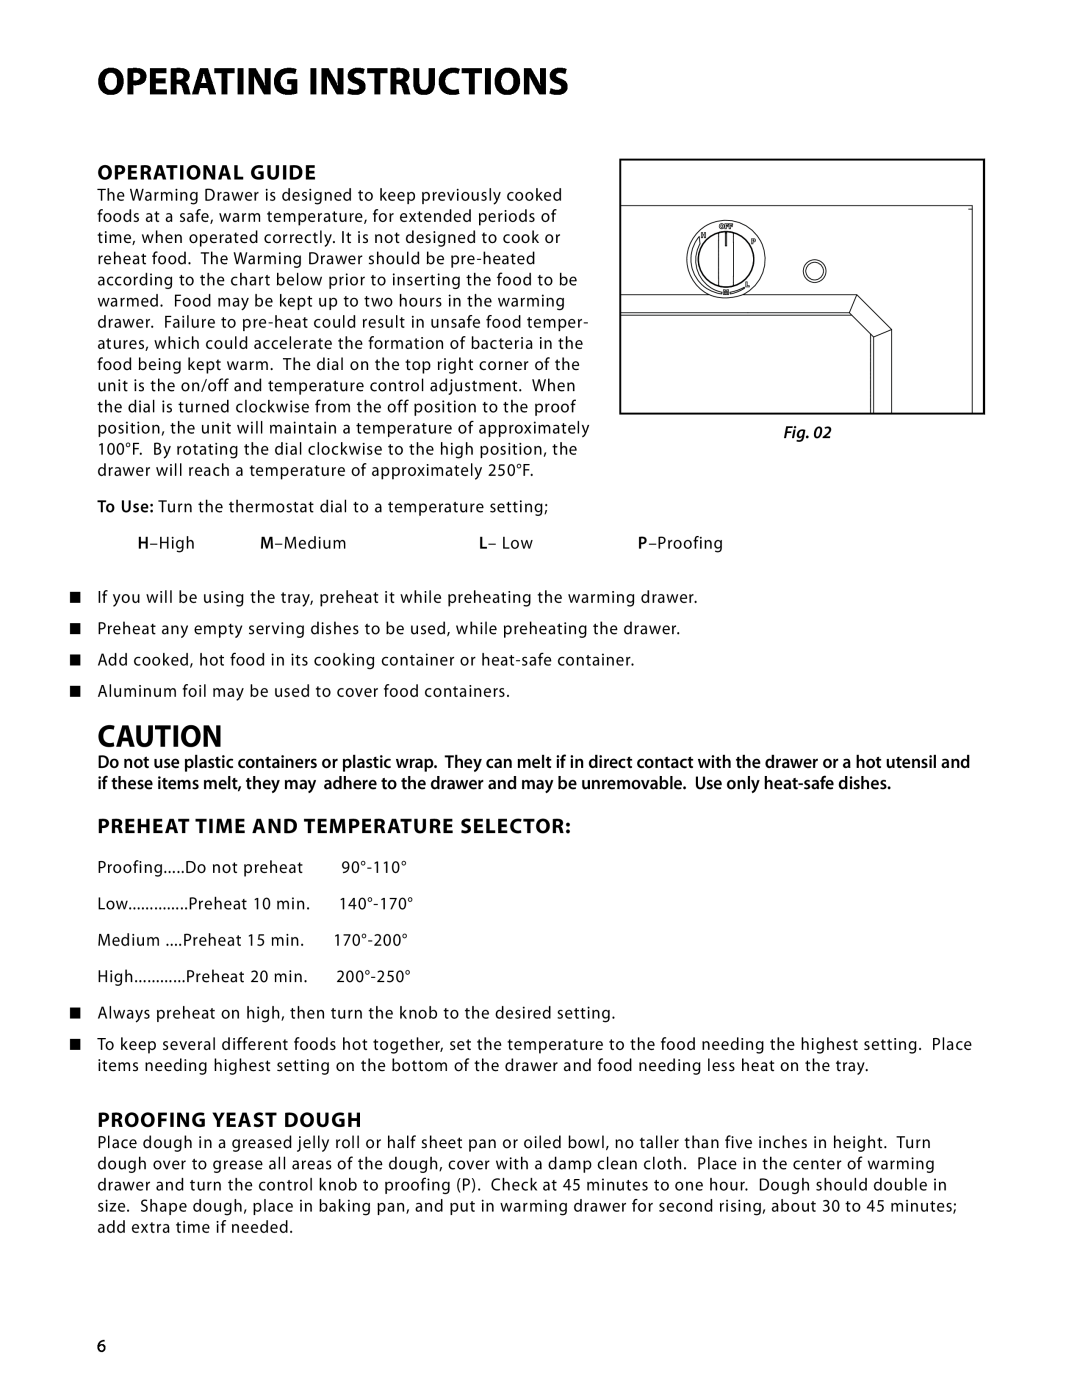 DCS WDT-30, WDTI Operating Instructions, Operational Guide, Preheat Time And Temperature Selector, Proofing Yeast Dough 